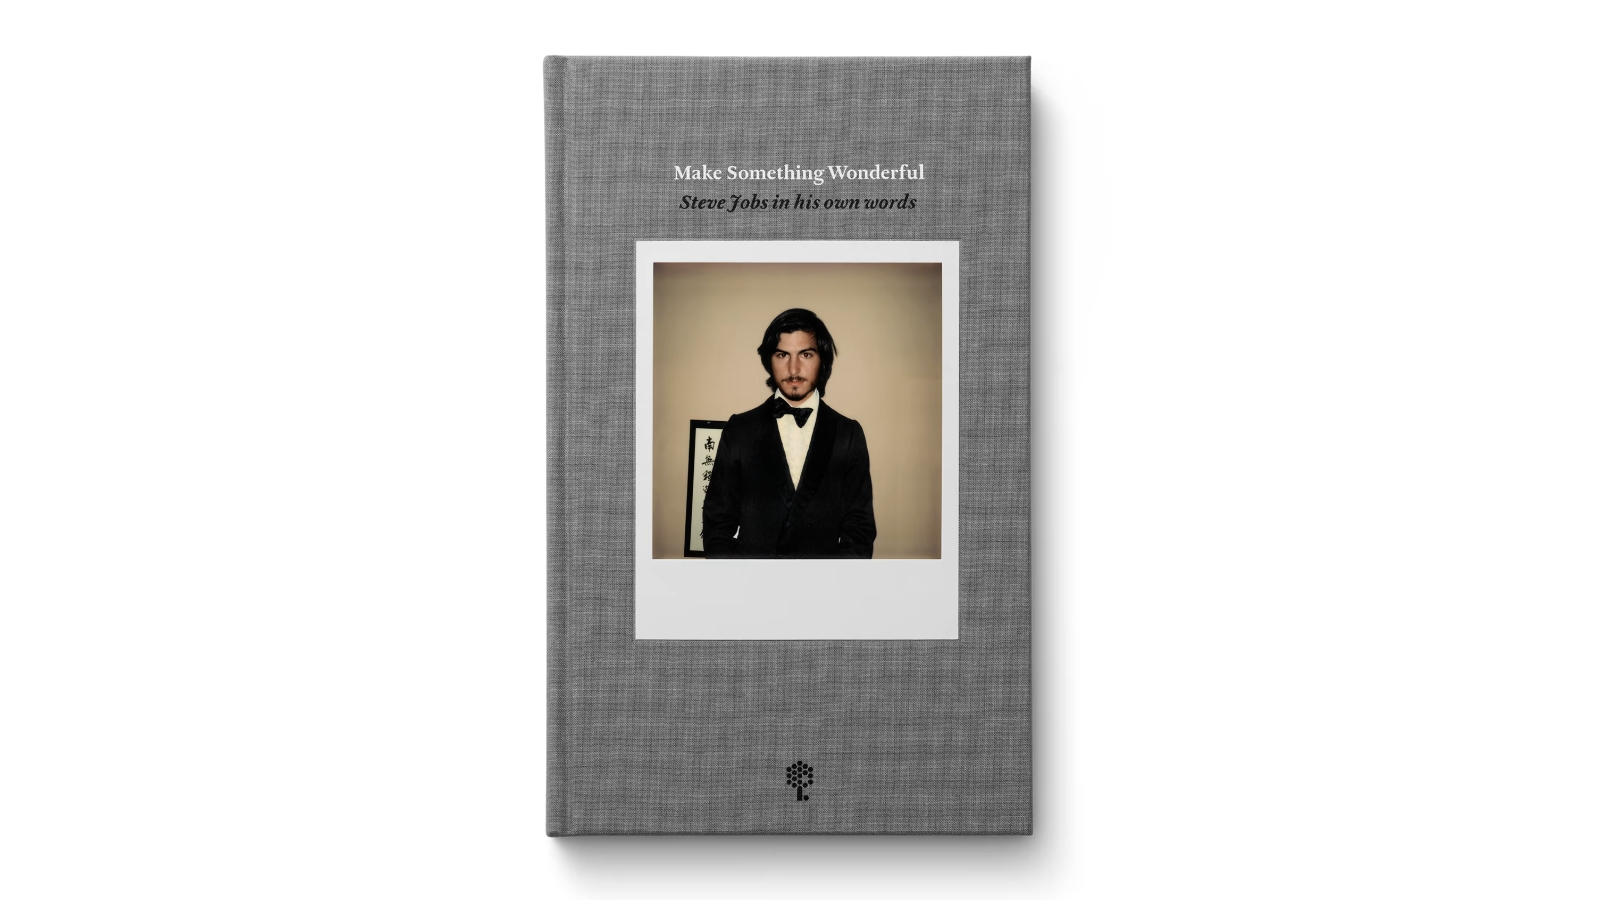 Free Steve Jobs Archive Book ‘Make Something Wonderful’ Now Available